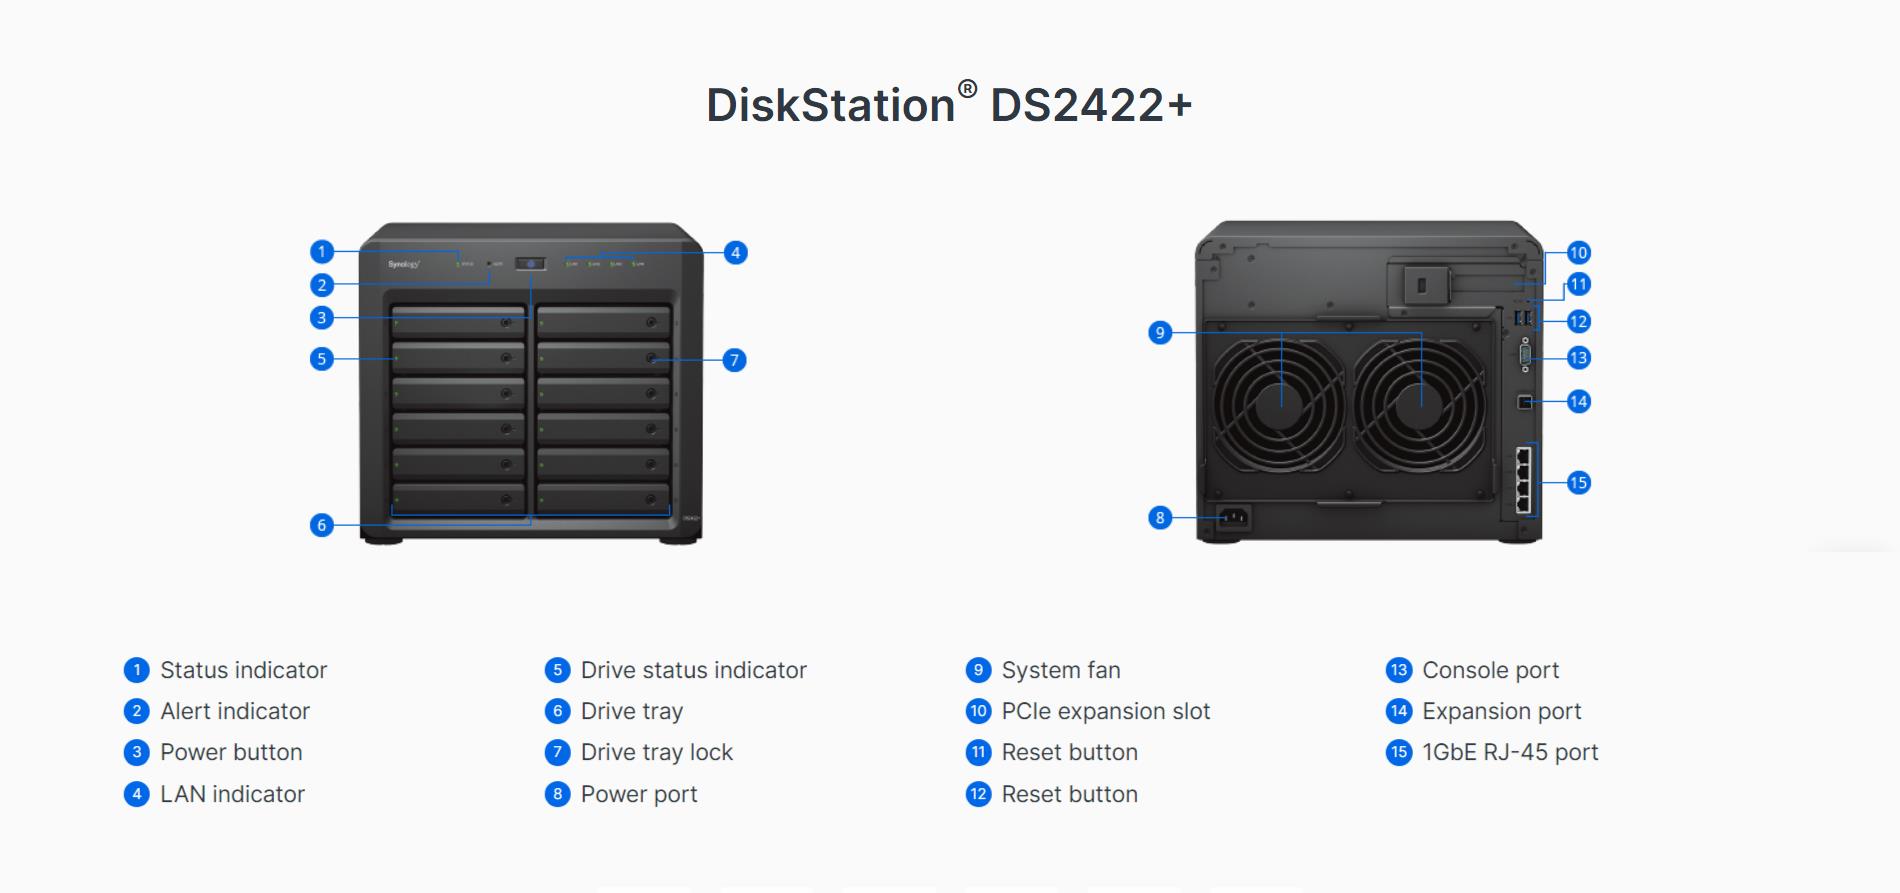 A large marketing image providing additional information about the product Synology DiskStation DS2422+ Quad Core 2.2GHz 4GB 12-Bay Diskless NAS Enclosure - Additional alt info not provided